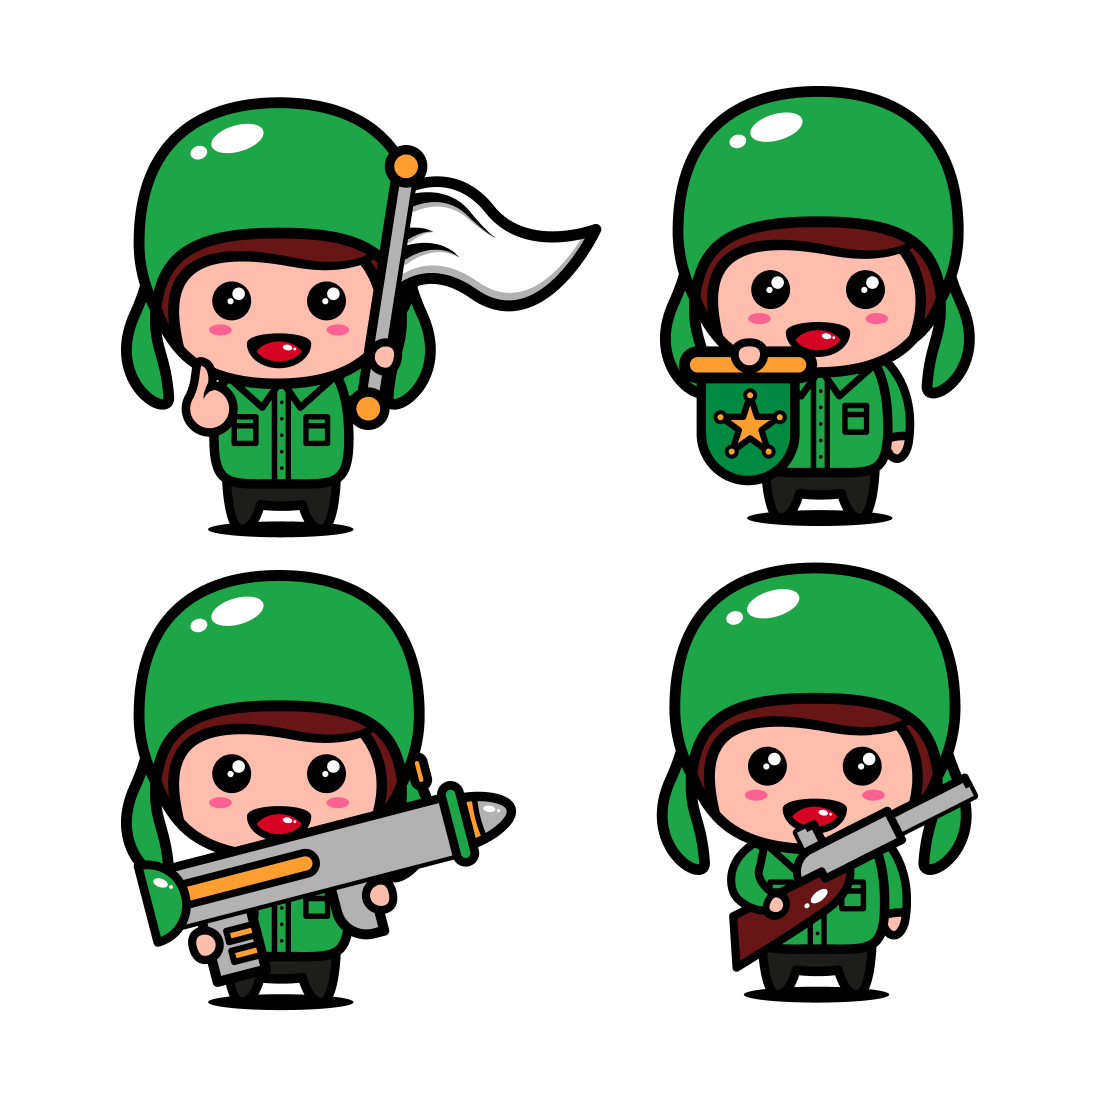 Military kid in green uniforms.